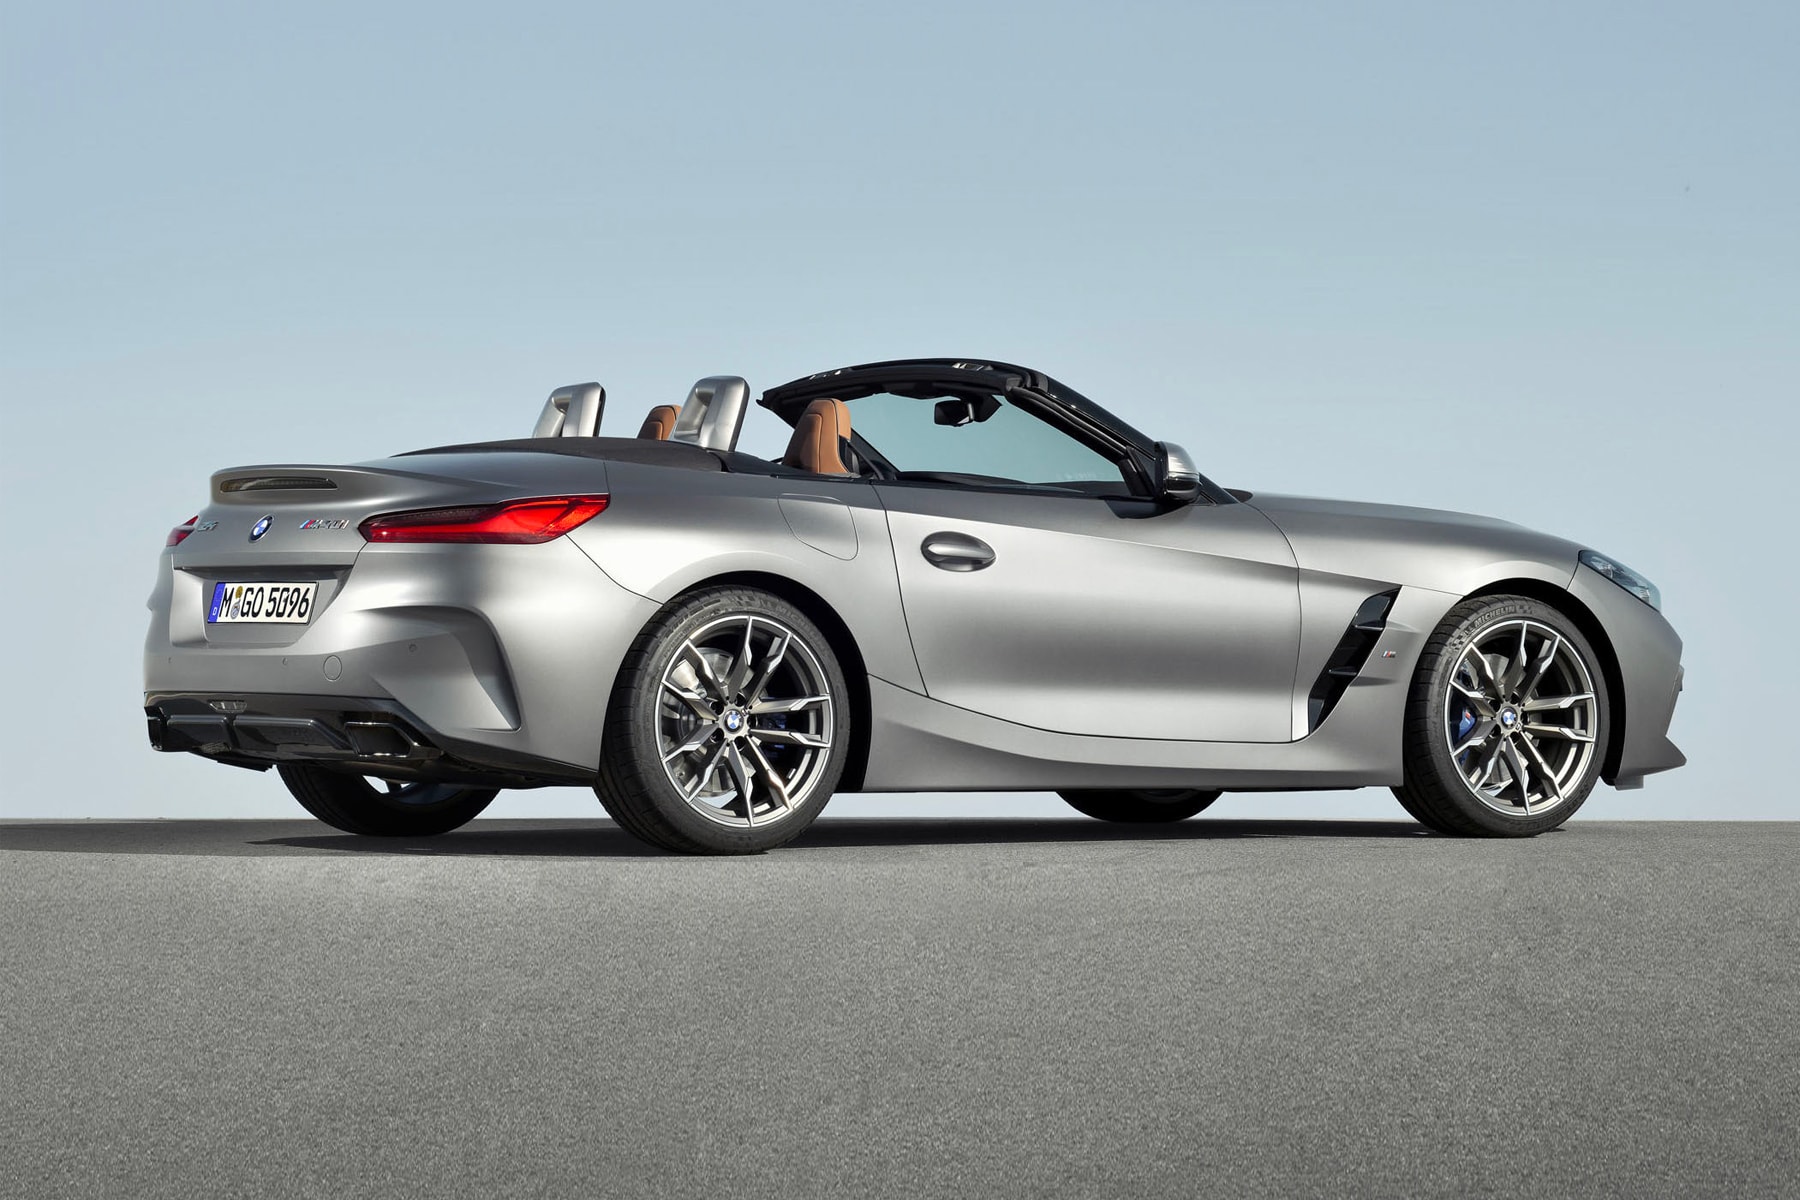 BMW 2019 Z4 sDrive30i 2020 Z4 M40i Roadsters Reveal First Look production model car